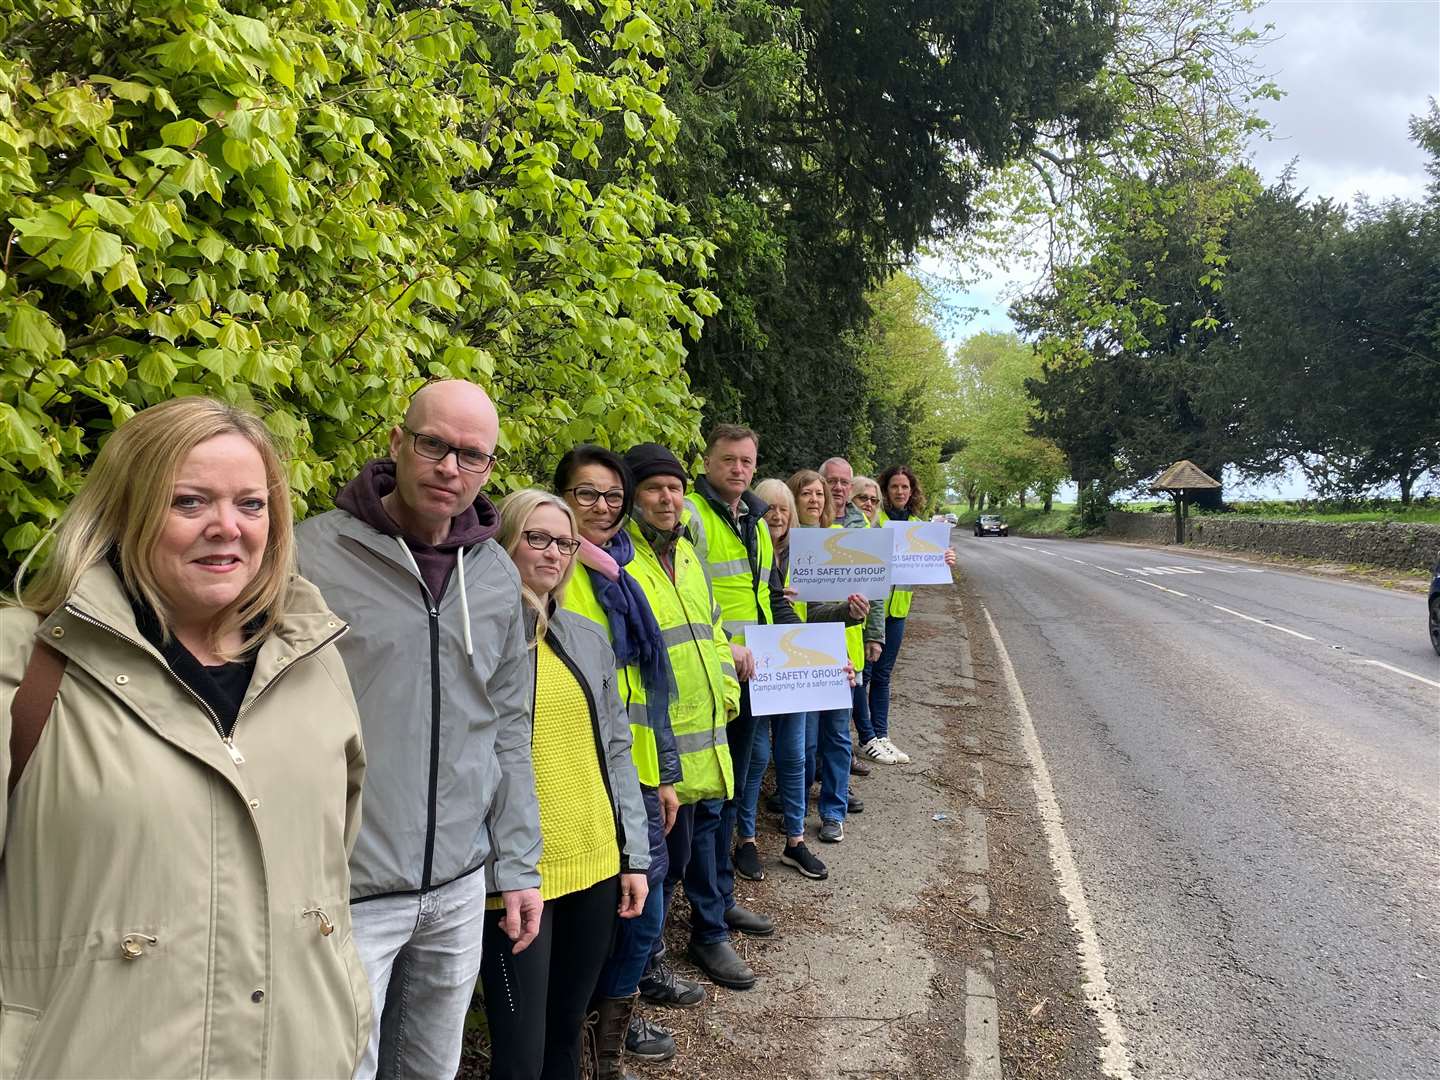 The A251 Safety Group is calling for changes on the route between Faversham and Challock, near Ashford